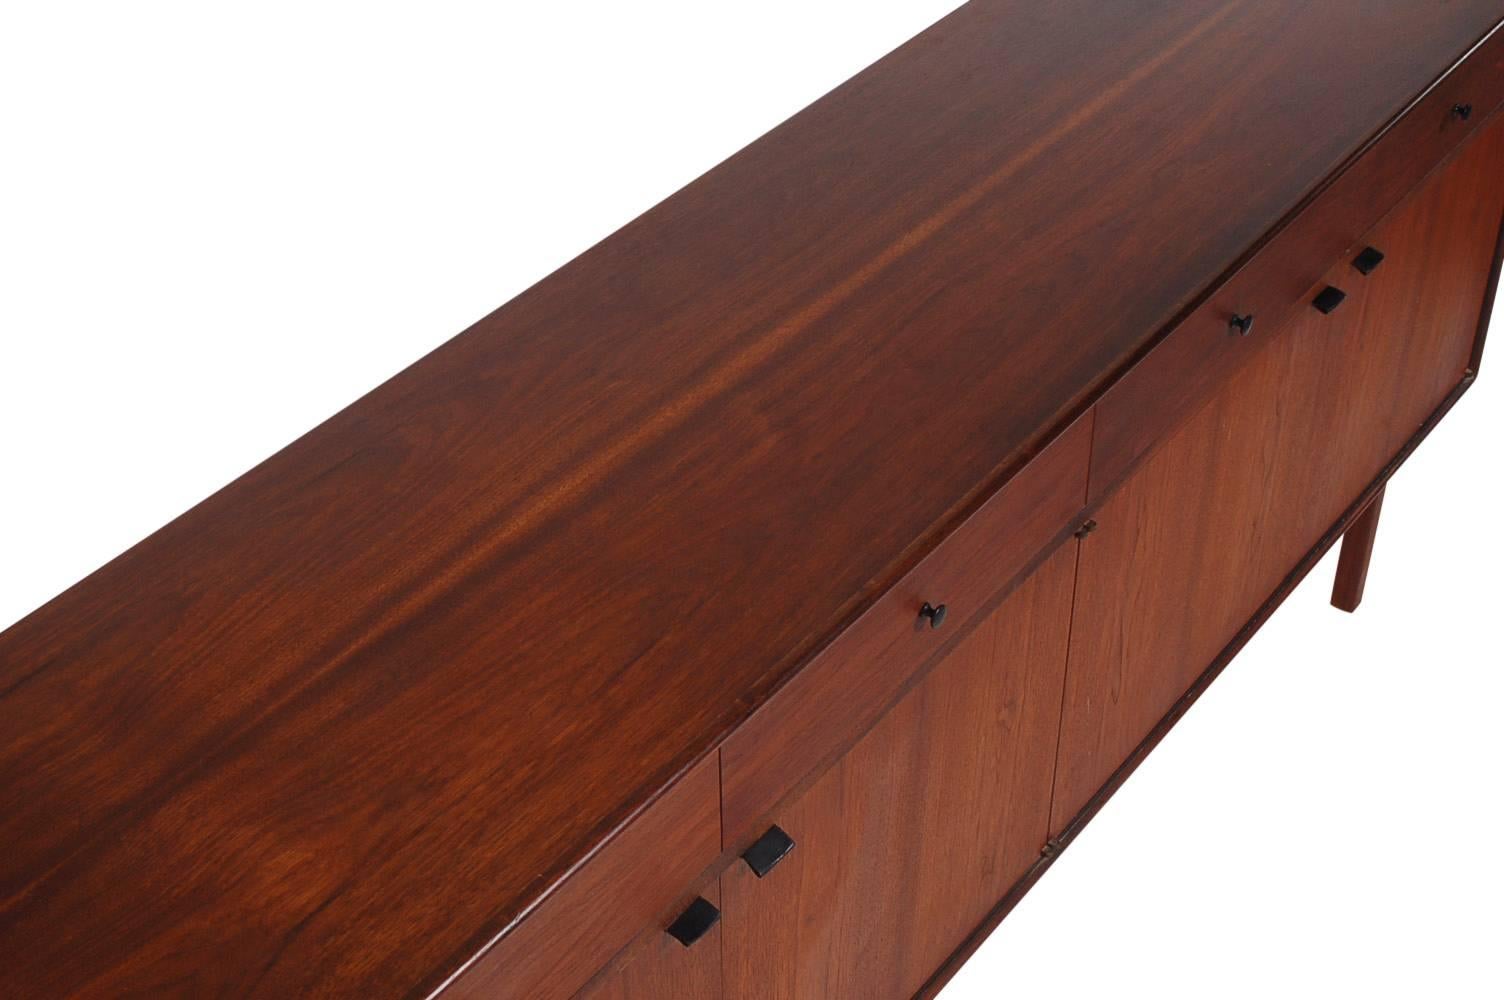 American Mid-Century Modern Walnut Cabinet or Credenza Attributed to Florence Knoll